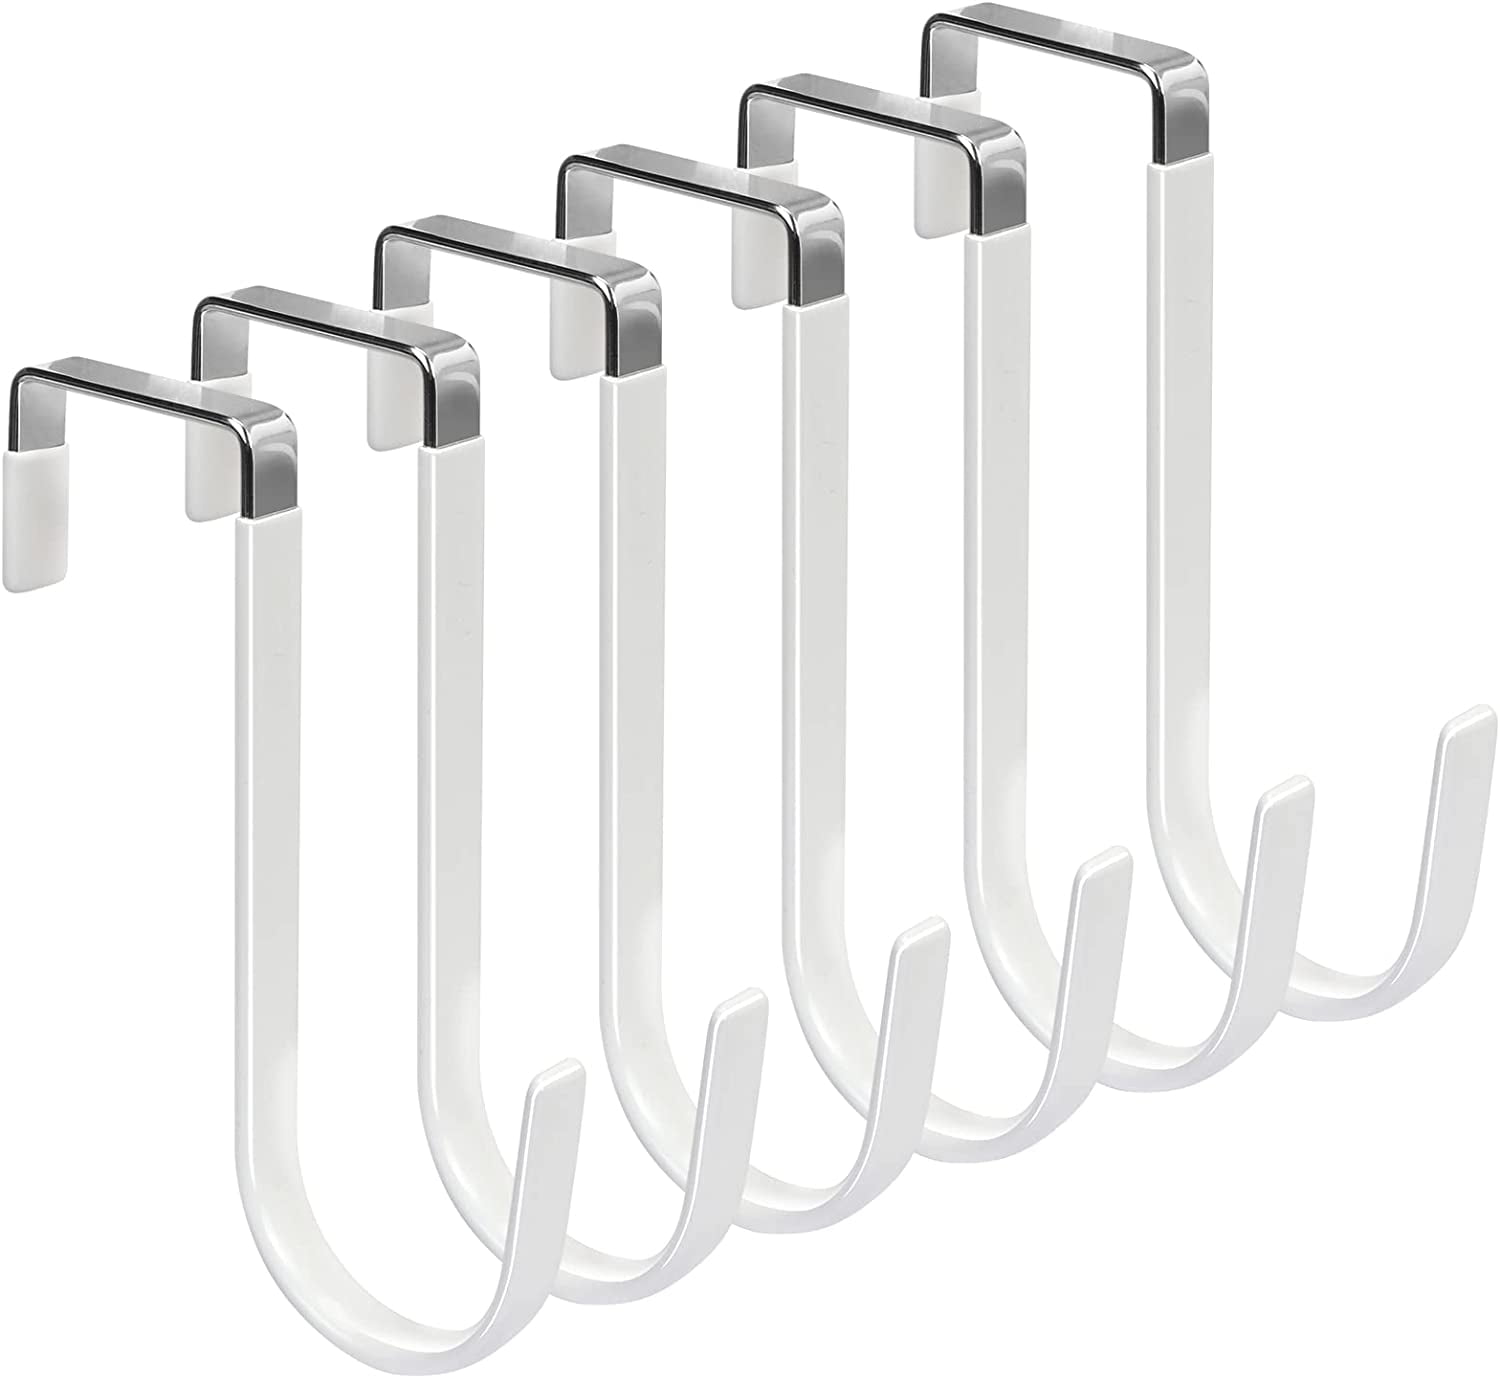 Large S Hooks for Hanging Heavy Duty, 6 inch Non Slip Vinyl Coated Metal  Black Closet S Hooks for Hanging Plants Outdoor Lights and Kitchen Pot Pan  Cups Closet Towels Jeans Hats (